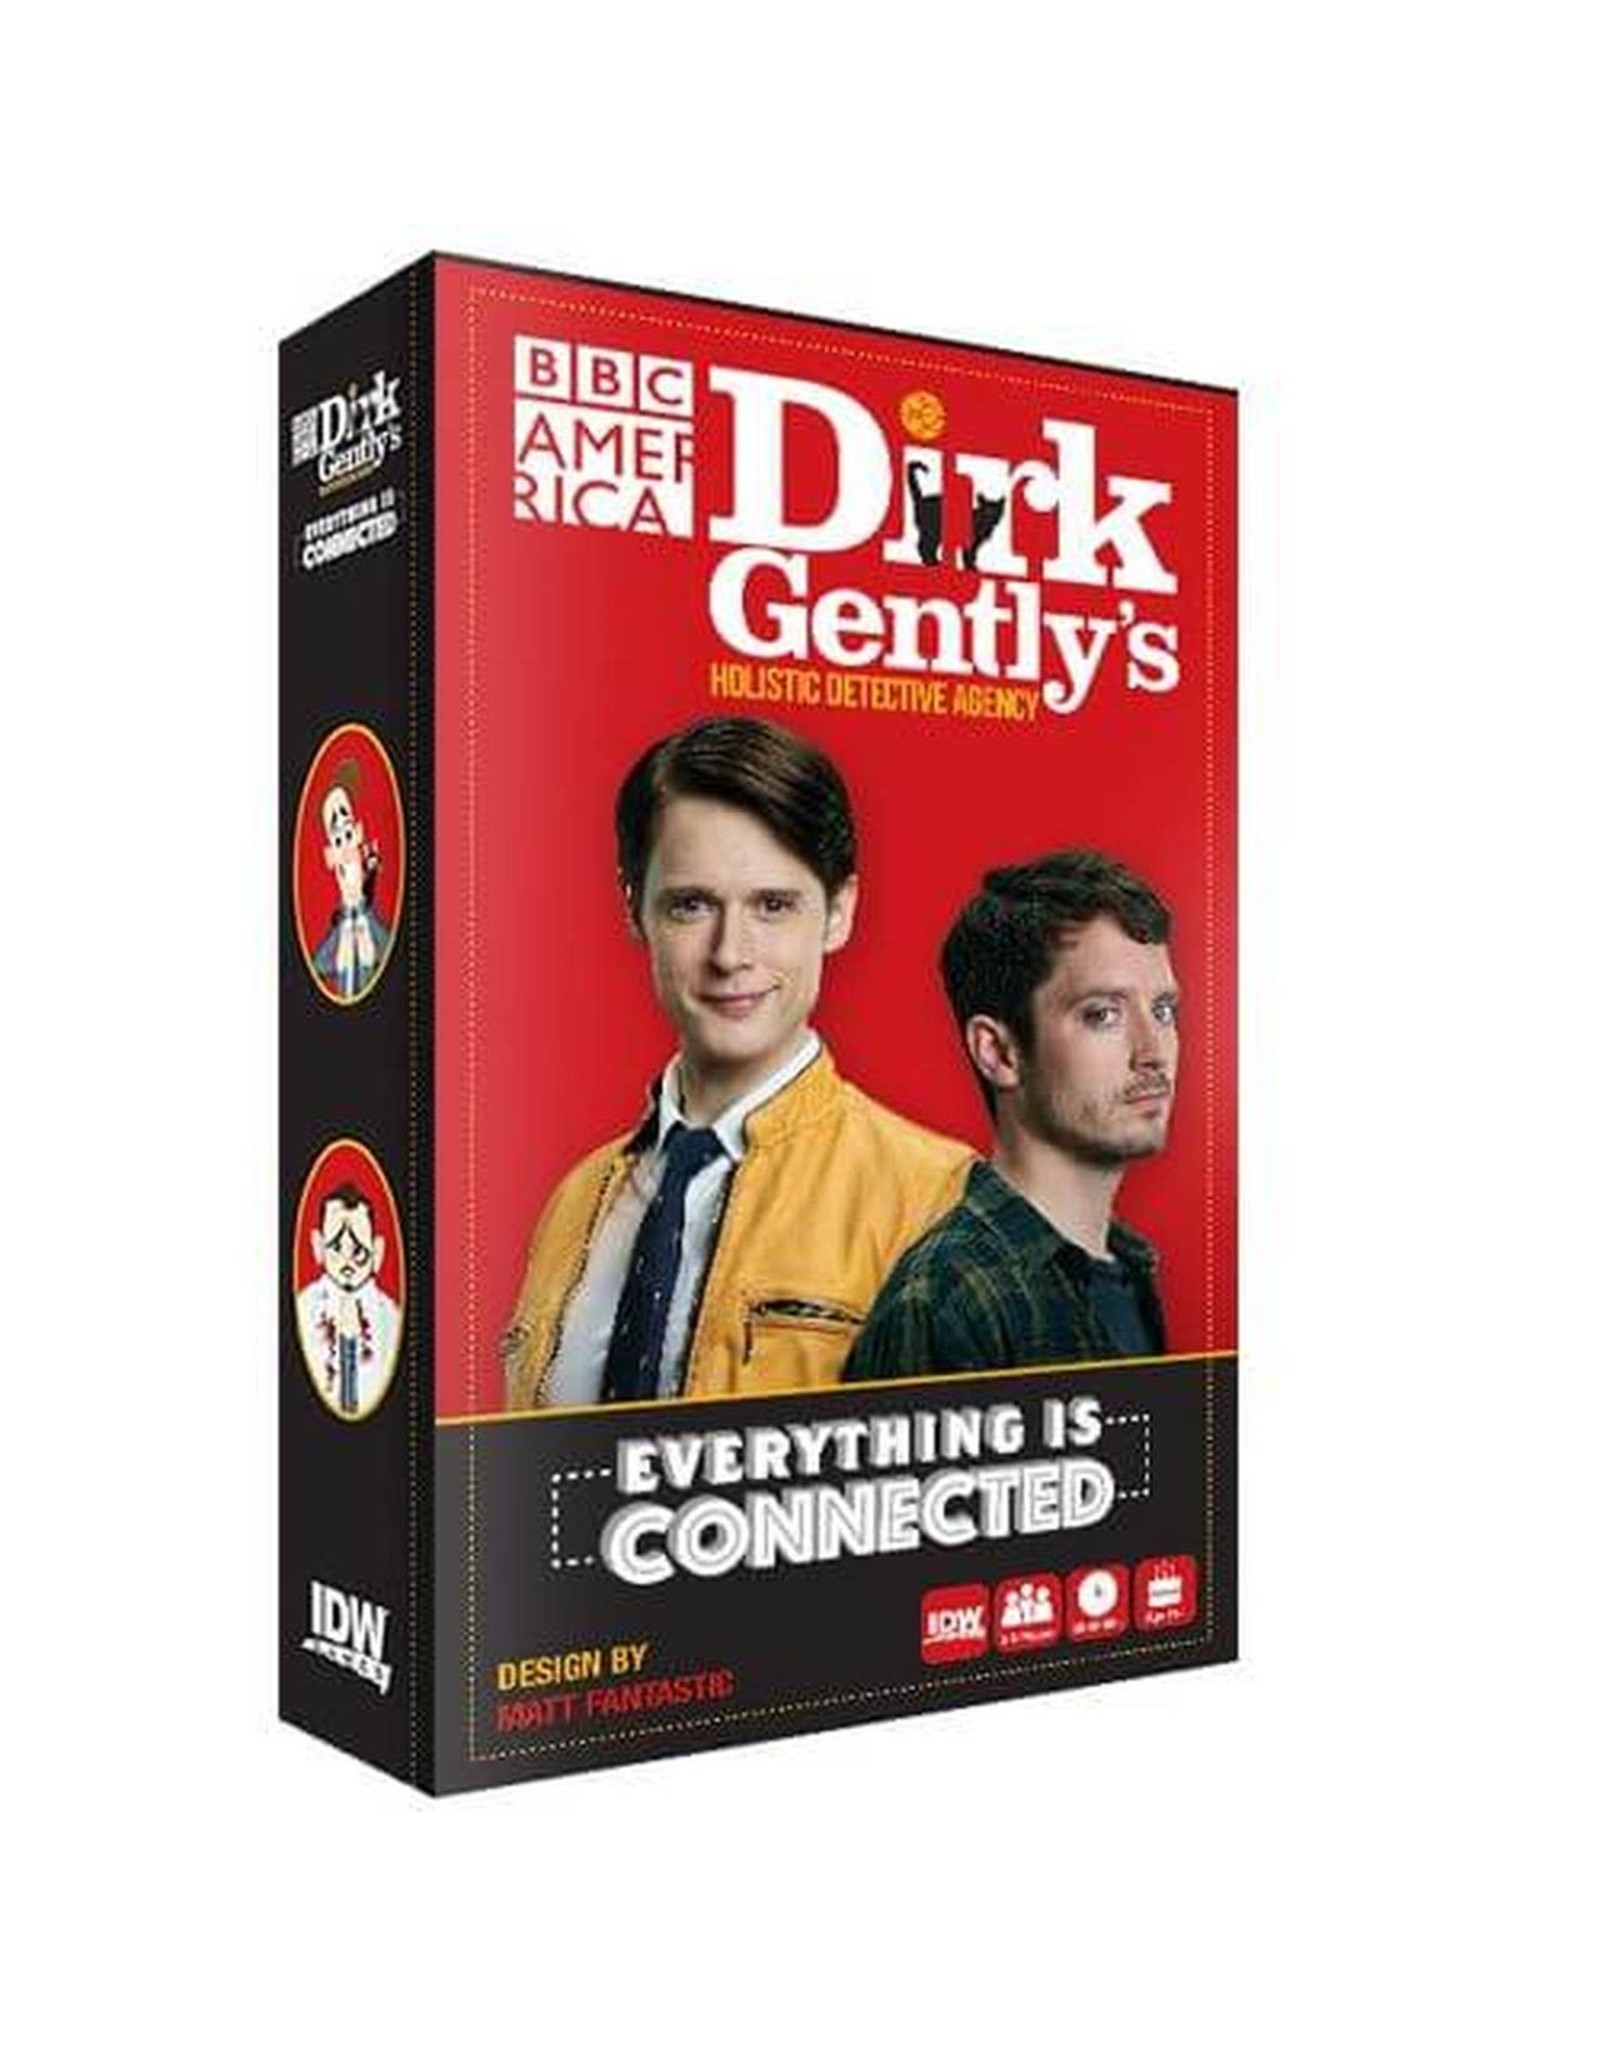 Dirk Gently's: Everything is Connected